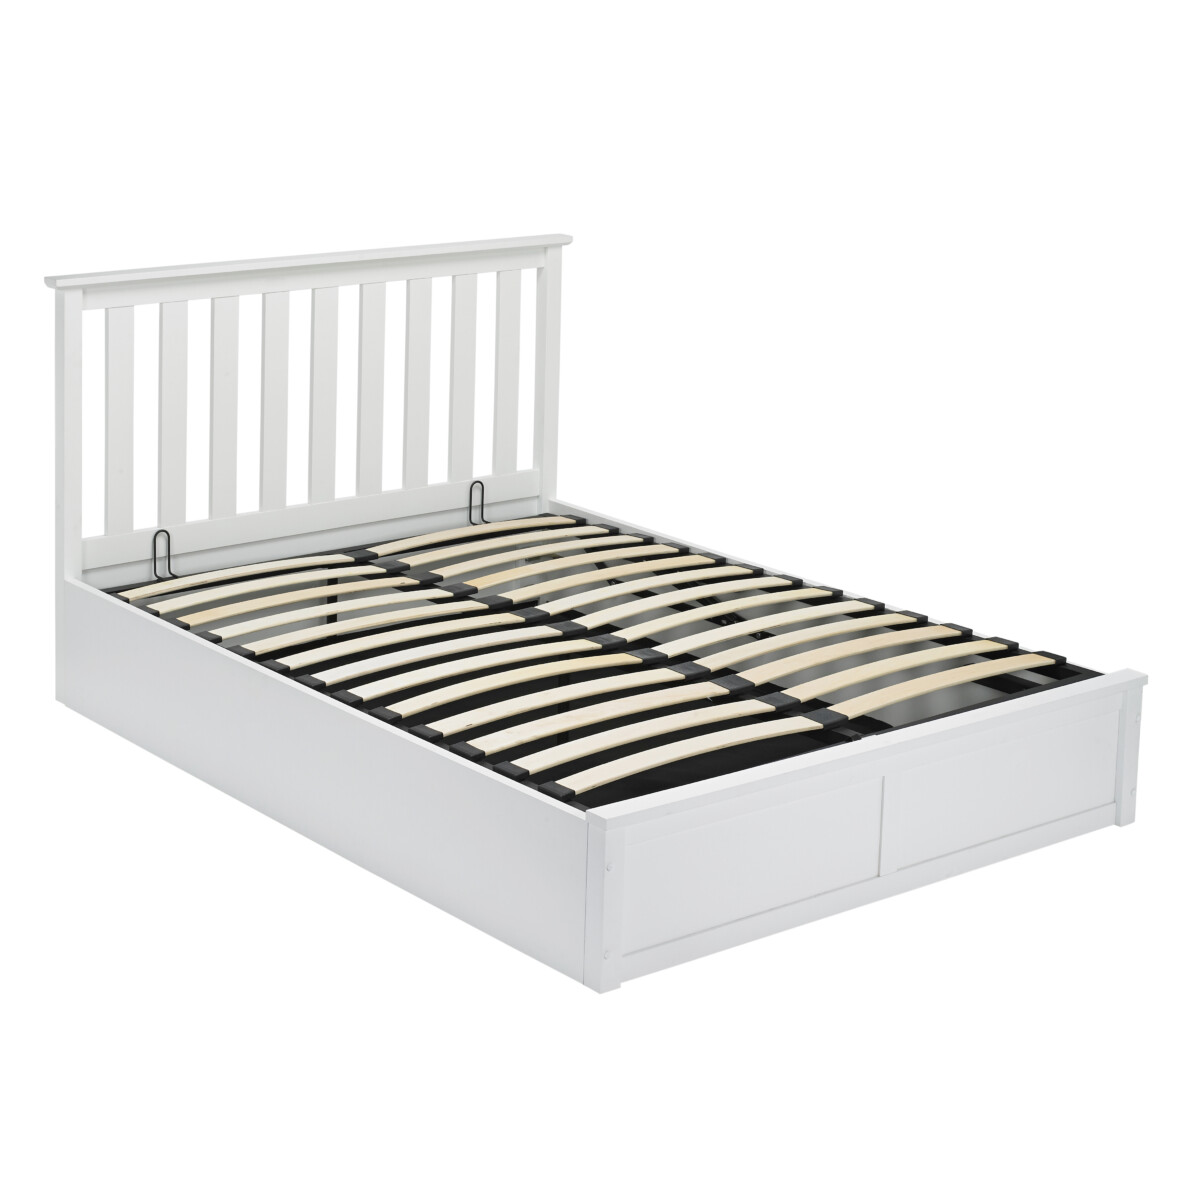 Oxford bed ottoman bed (6)